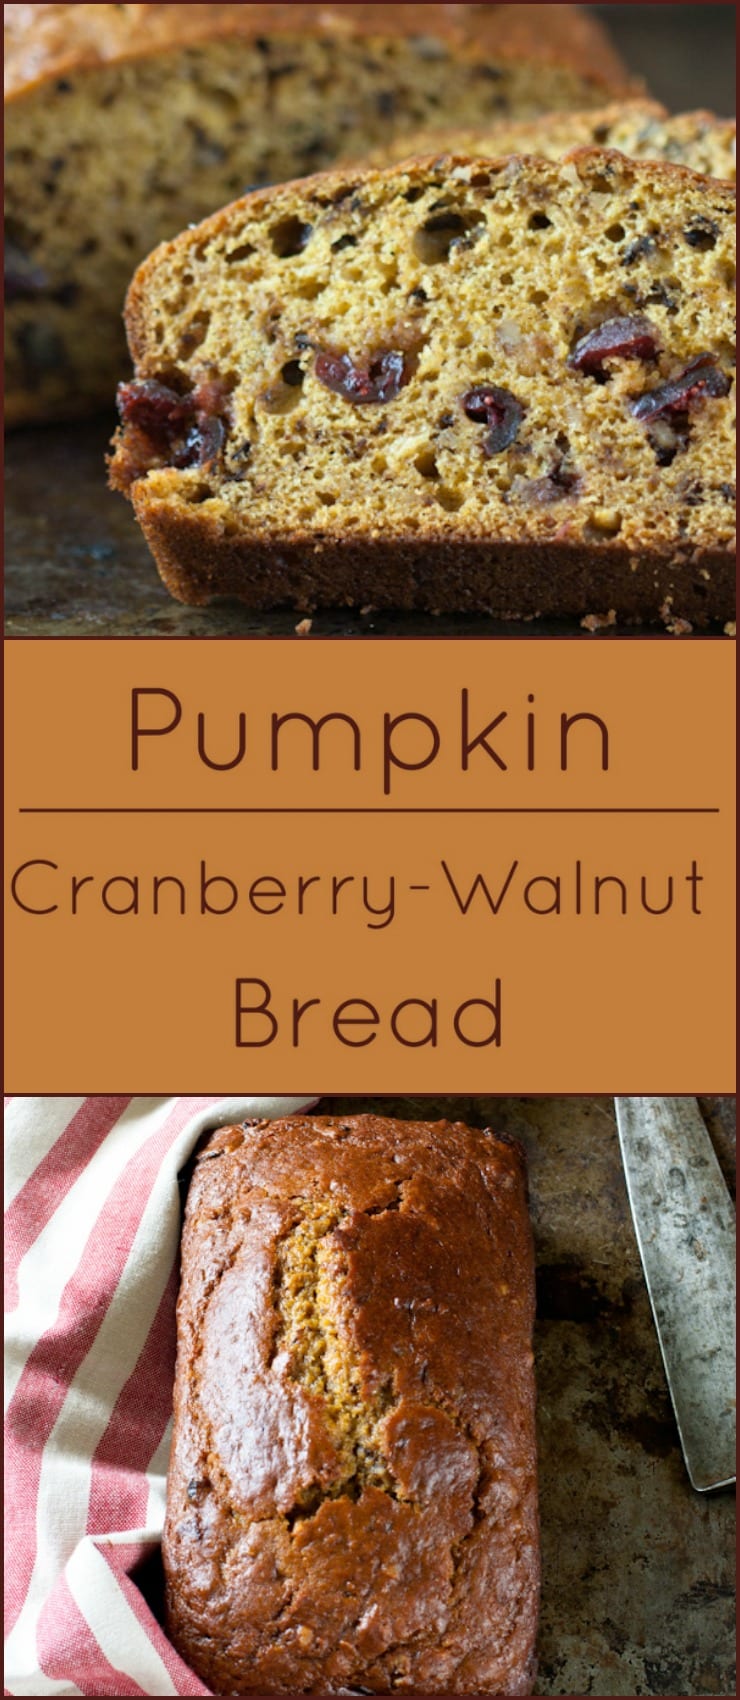 Moist and tender Pumpkin Cranberry Walnut Bread with a hint of autumn spices.